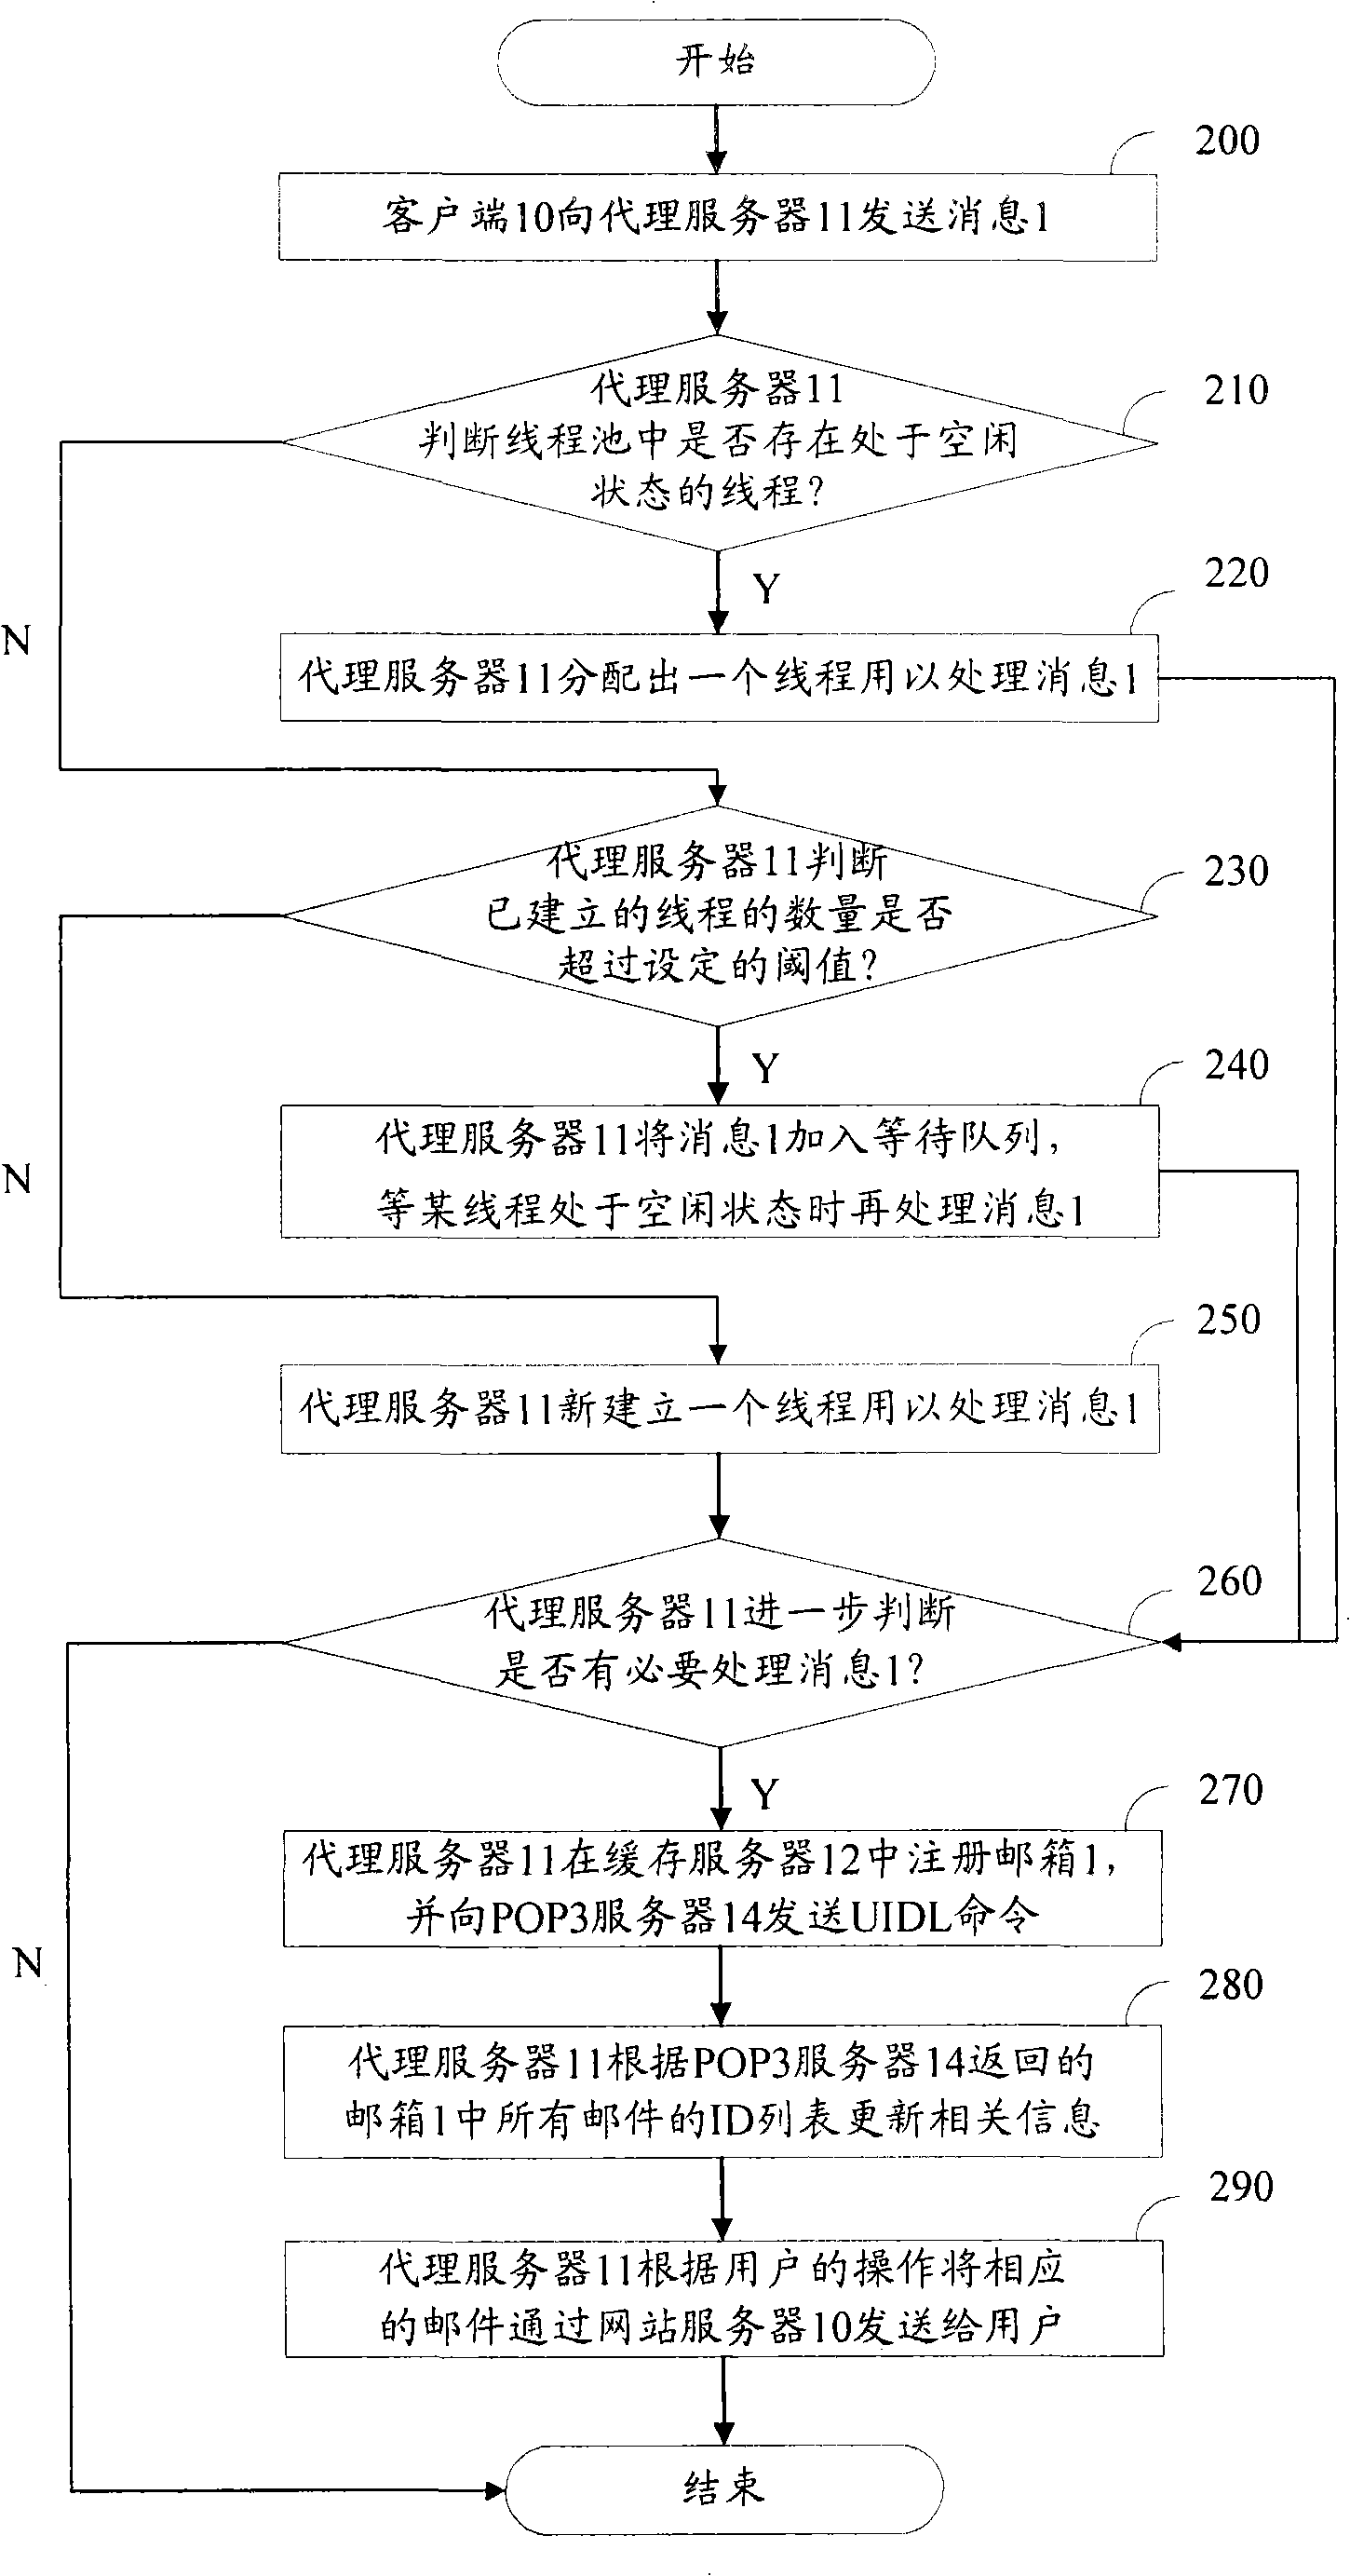 Method, apparatus and system for processing electronic mail